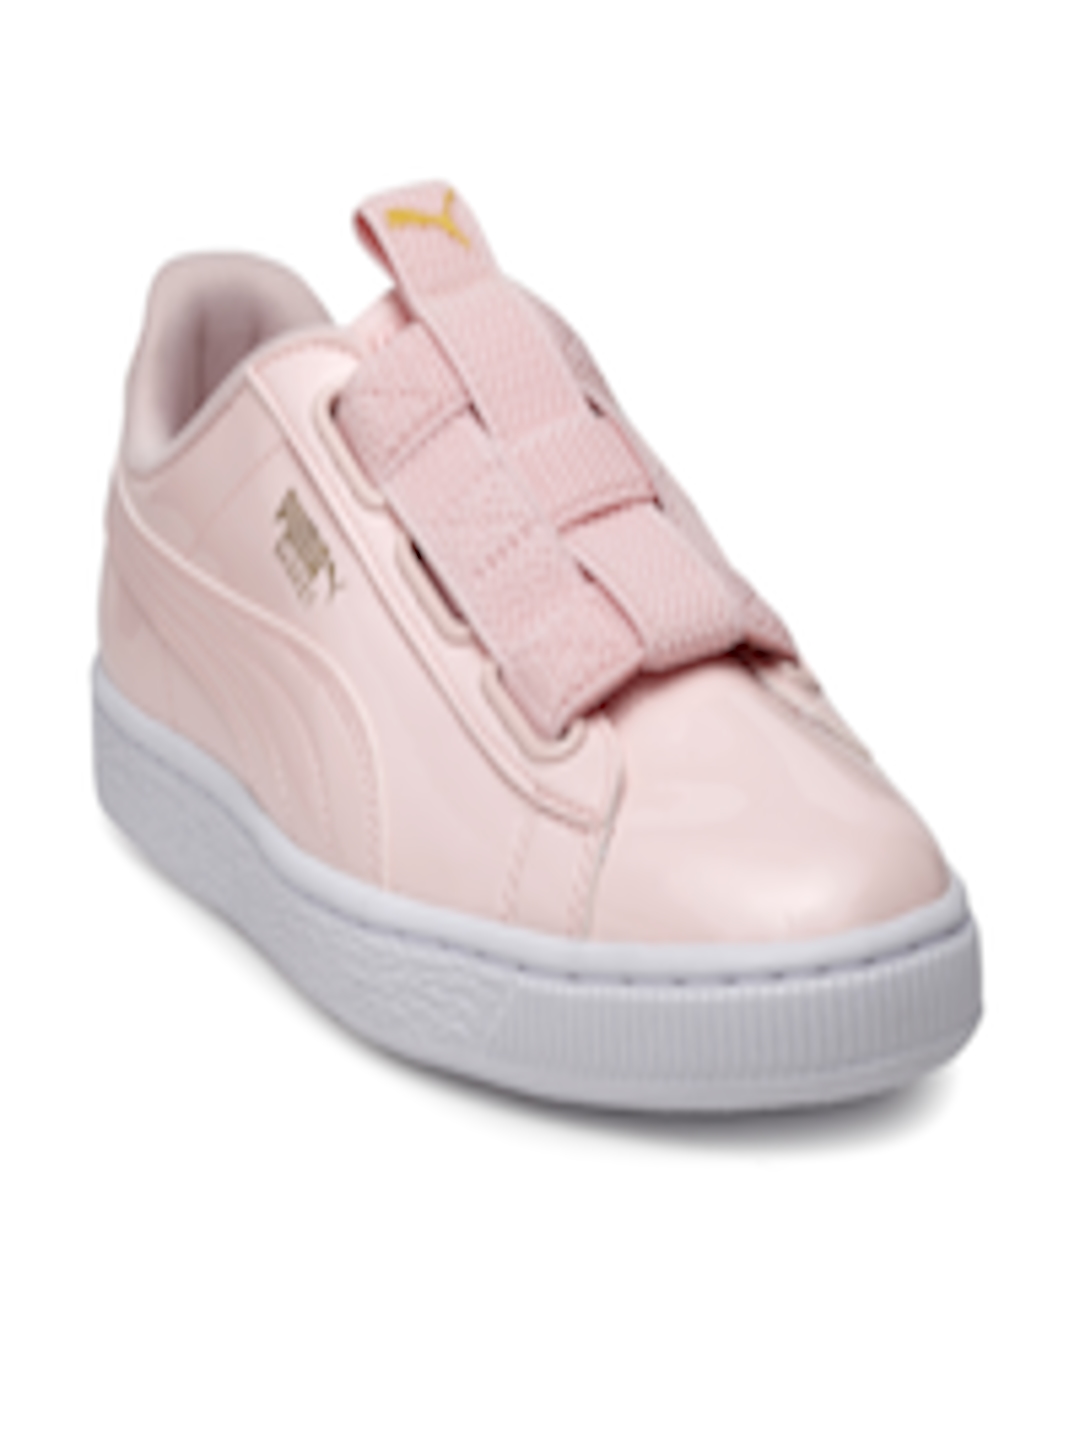 Buy Puma Women Pink Basket Maze Leather Slip On Sneakers - Casual Shoes ...